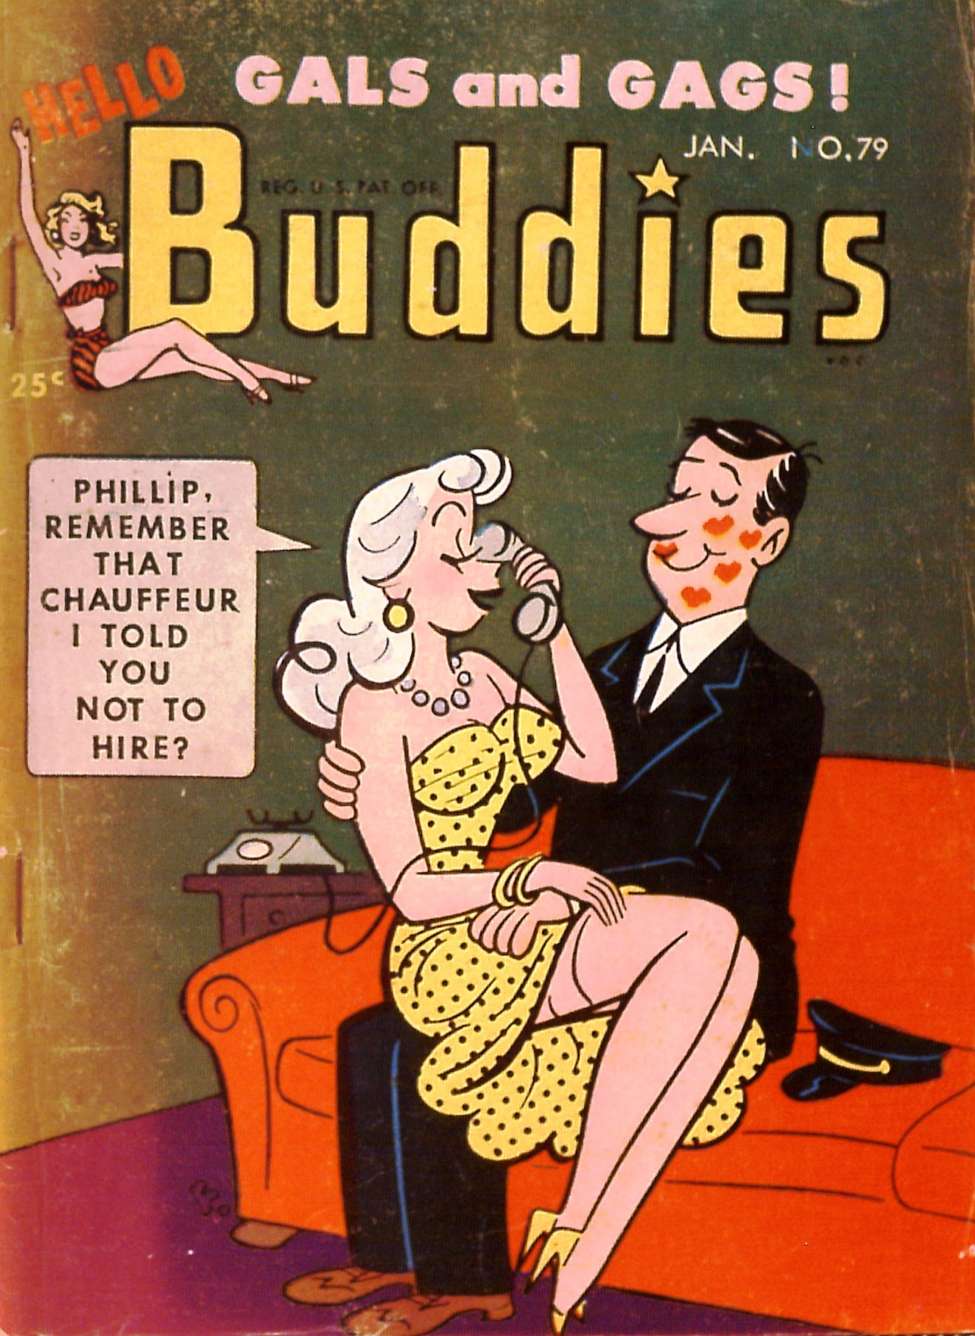 Comic Book Cover For Hello Buddies 79